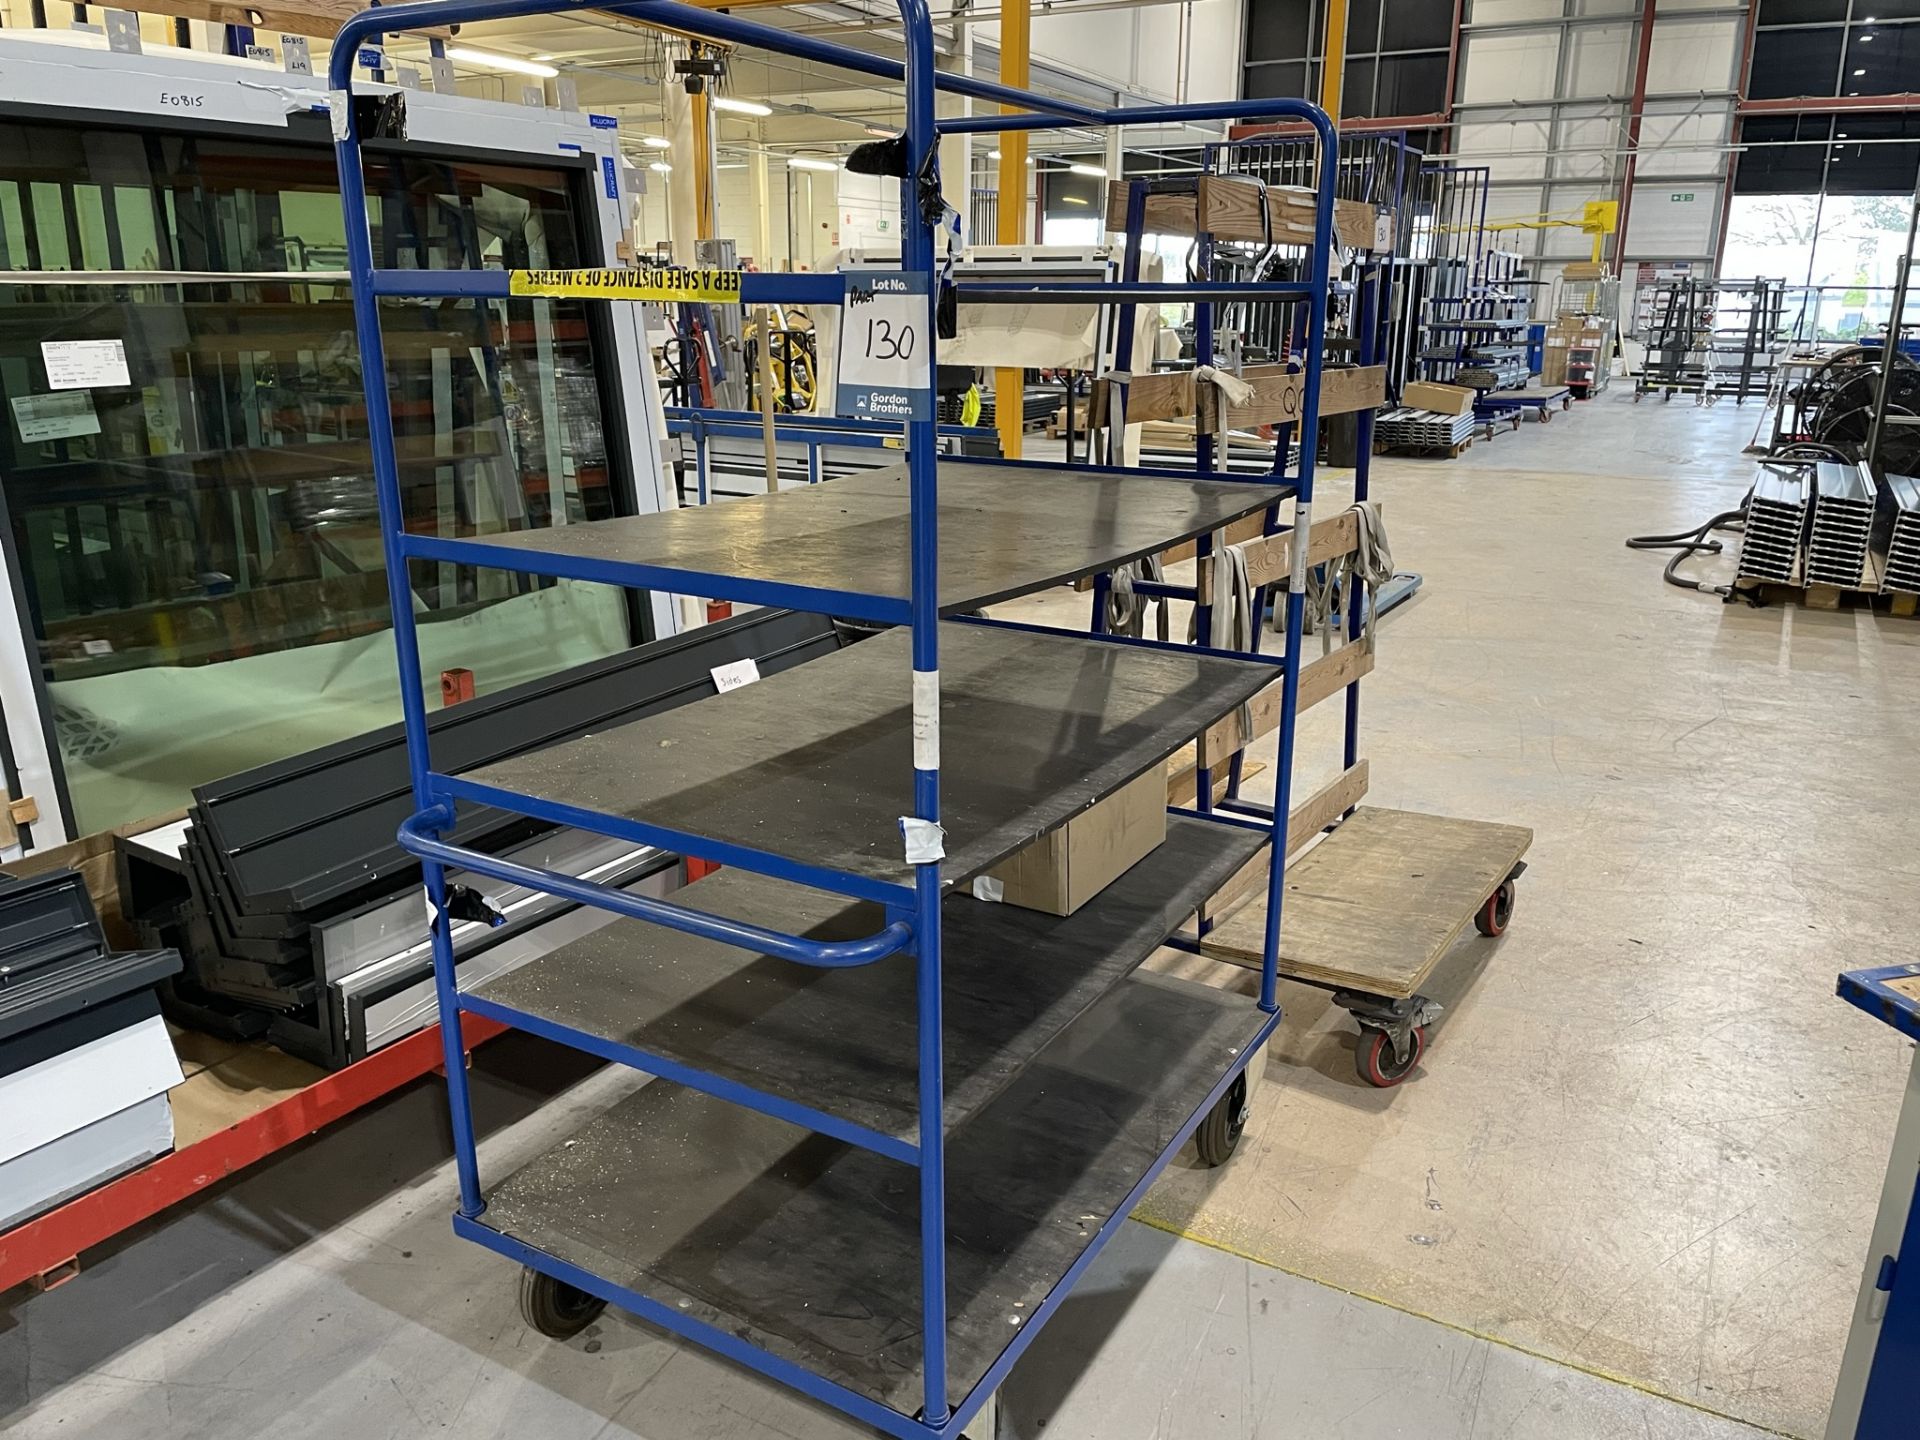 2x (no.) metal framed double sided transporter racks and metal framed, five tier transporter rack (